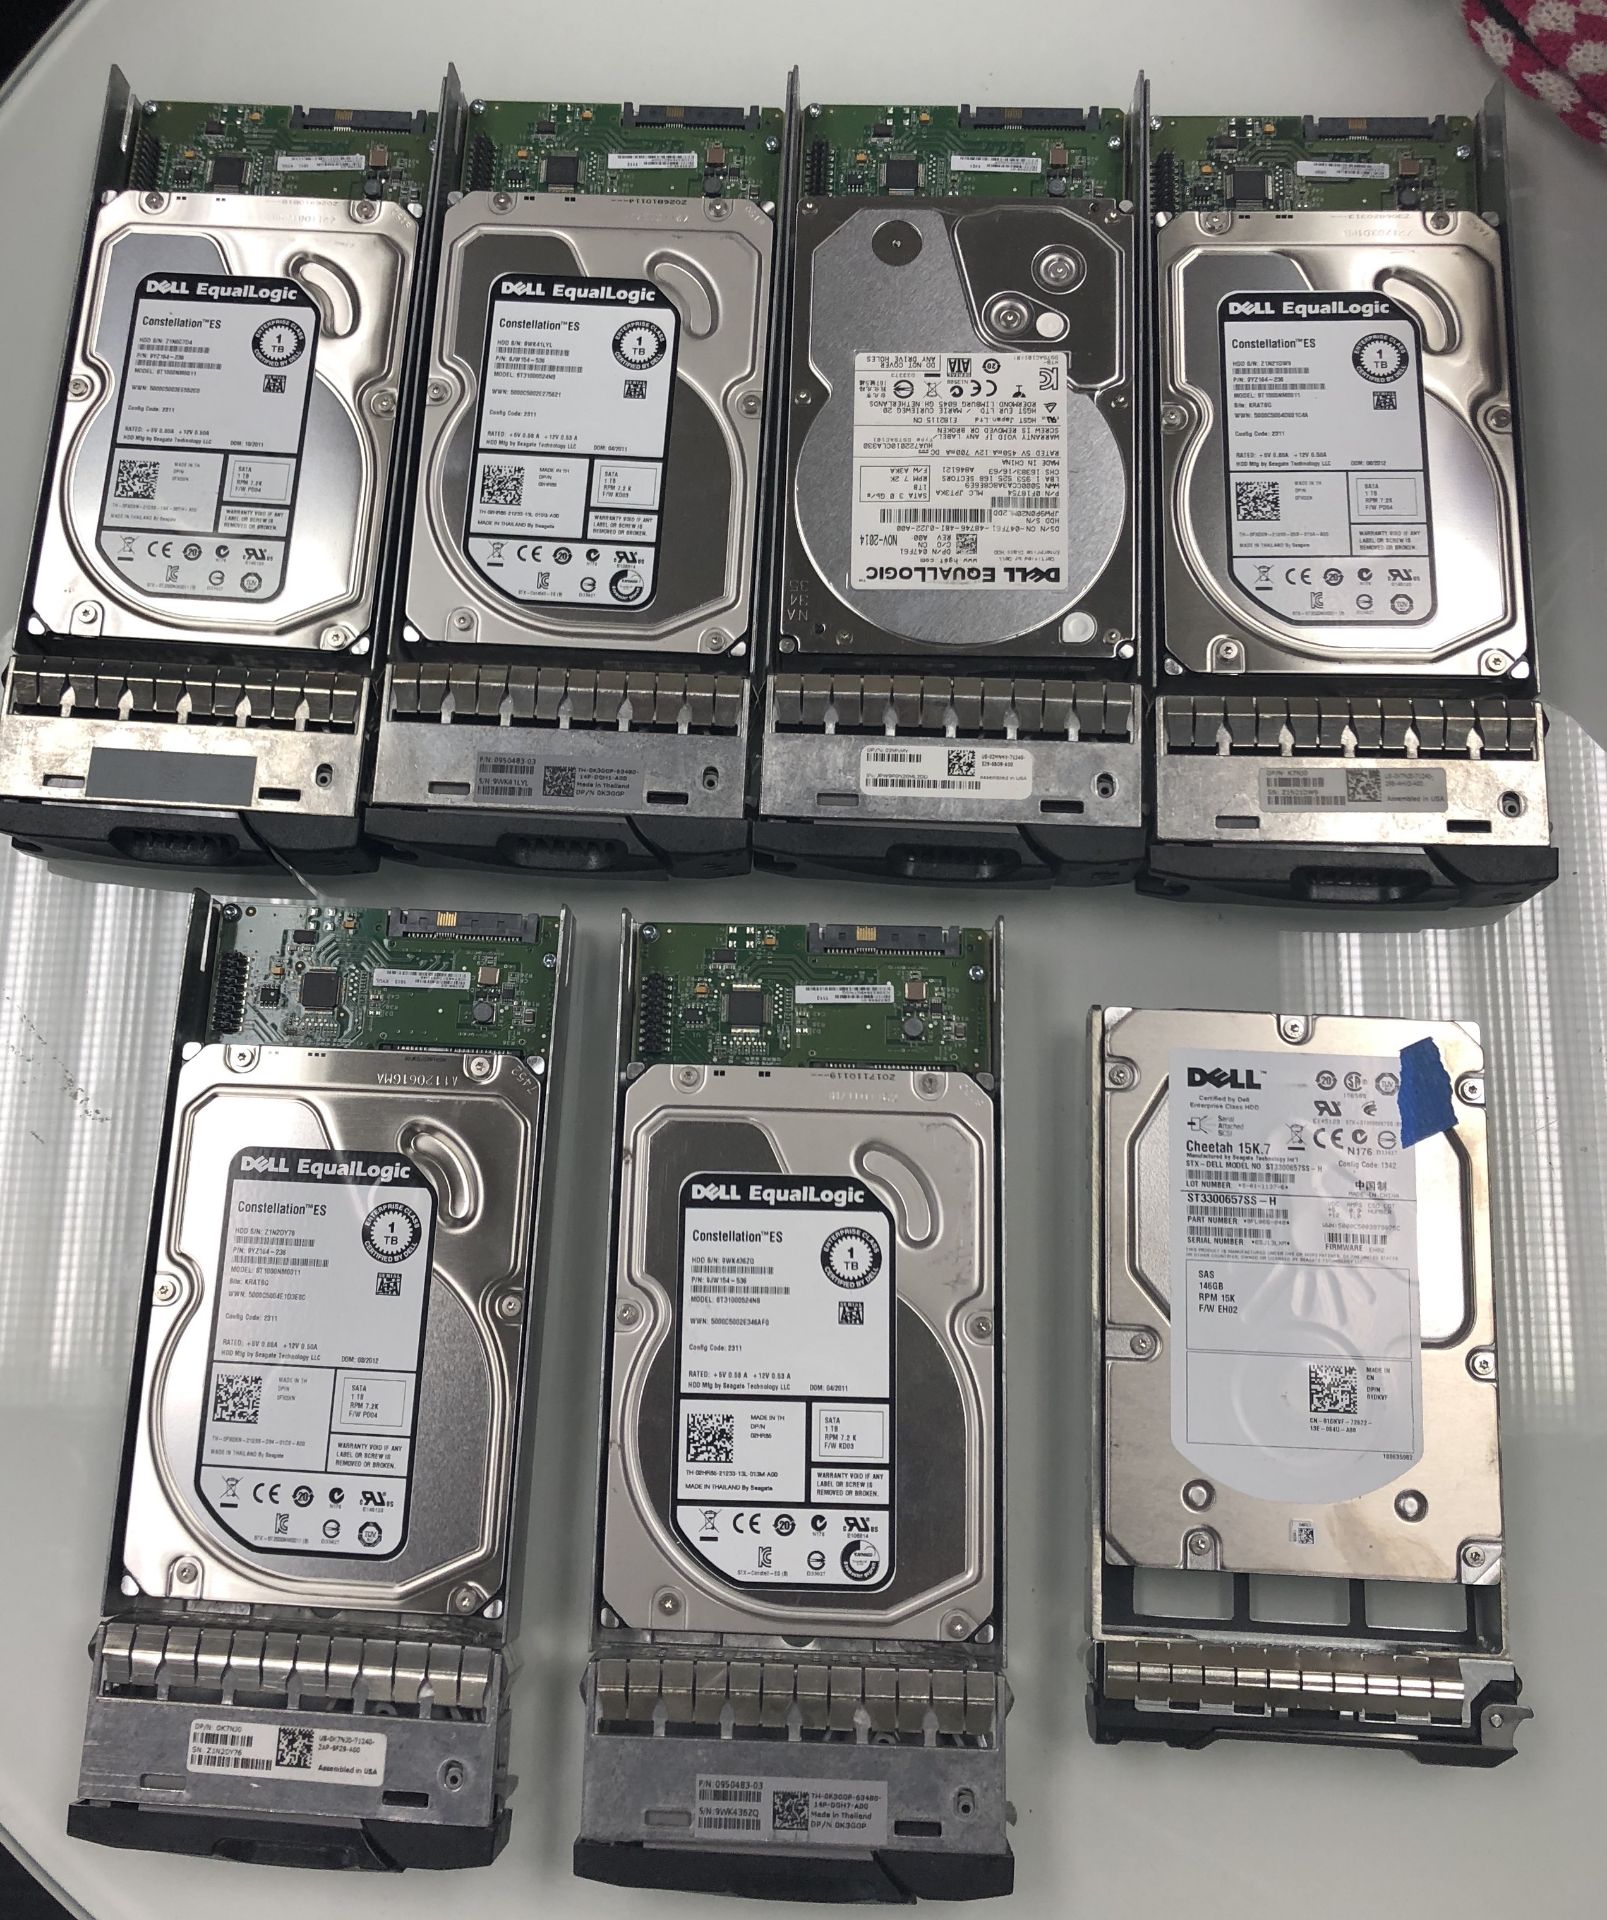 7 HARD DRIVES, ALL FROM NETWORKING SET UP BCBG